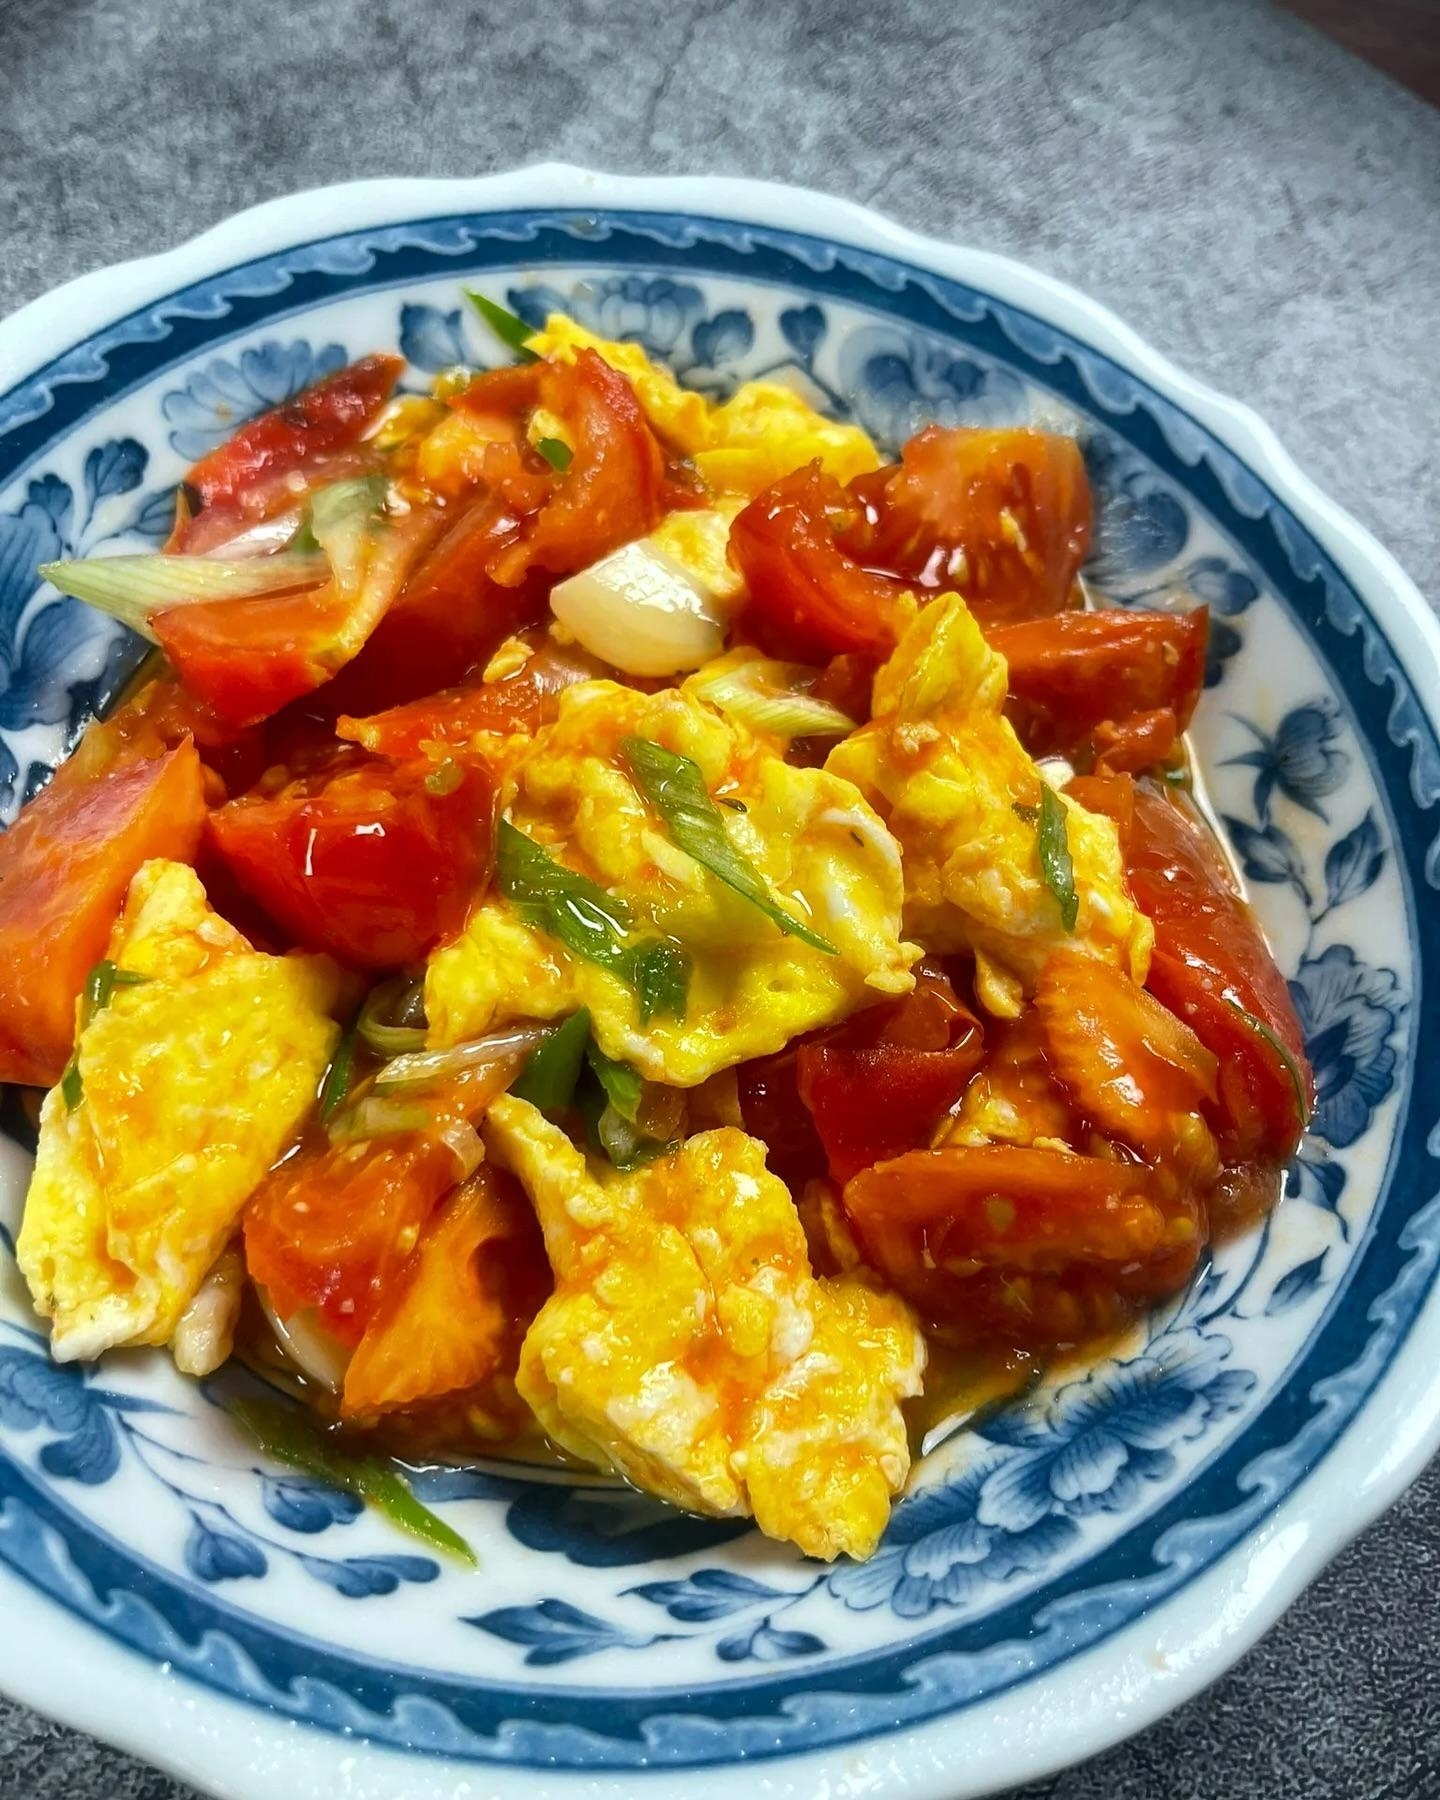 Stir-fried dish with tomatoes and eggs in a blue-patterned bowl